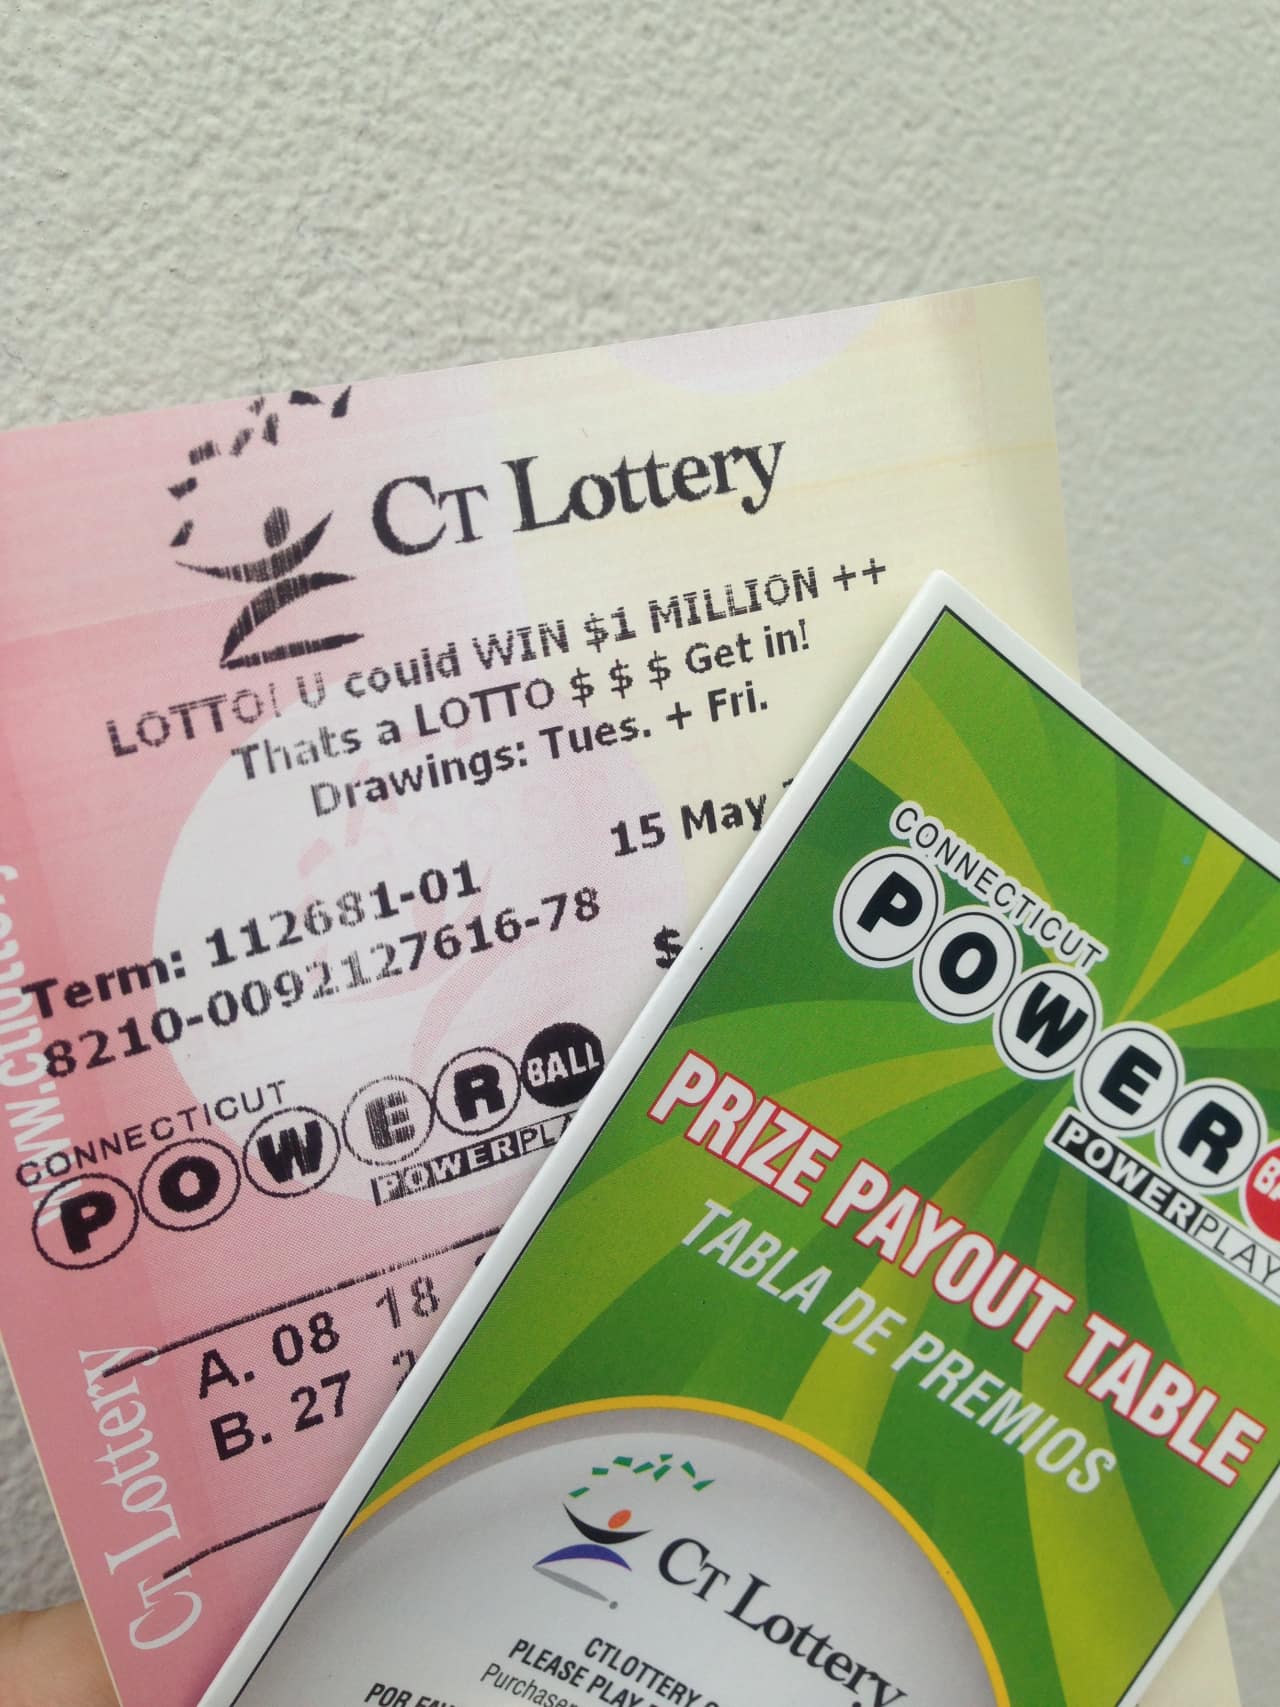 There are many places to buy Powerball tickets in New Canaan. 